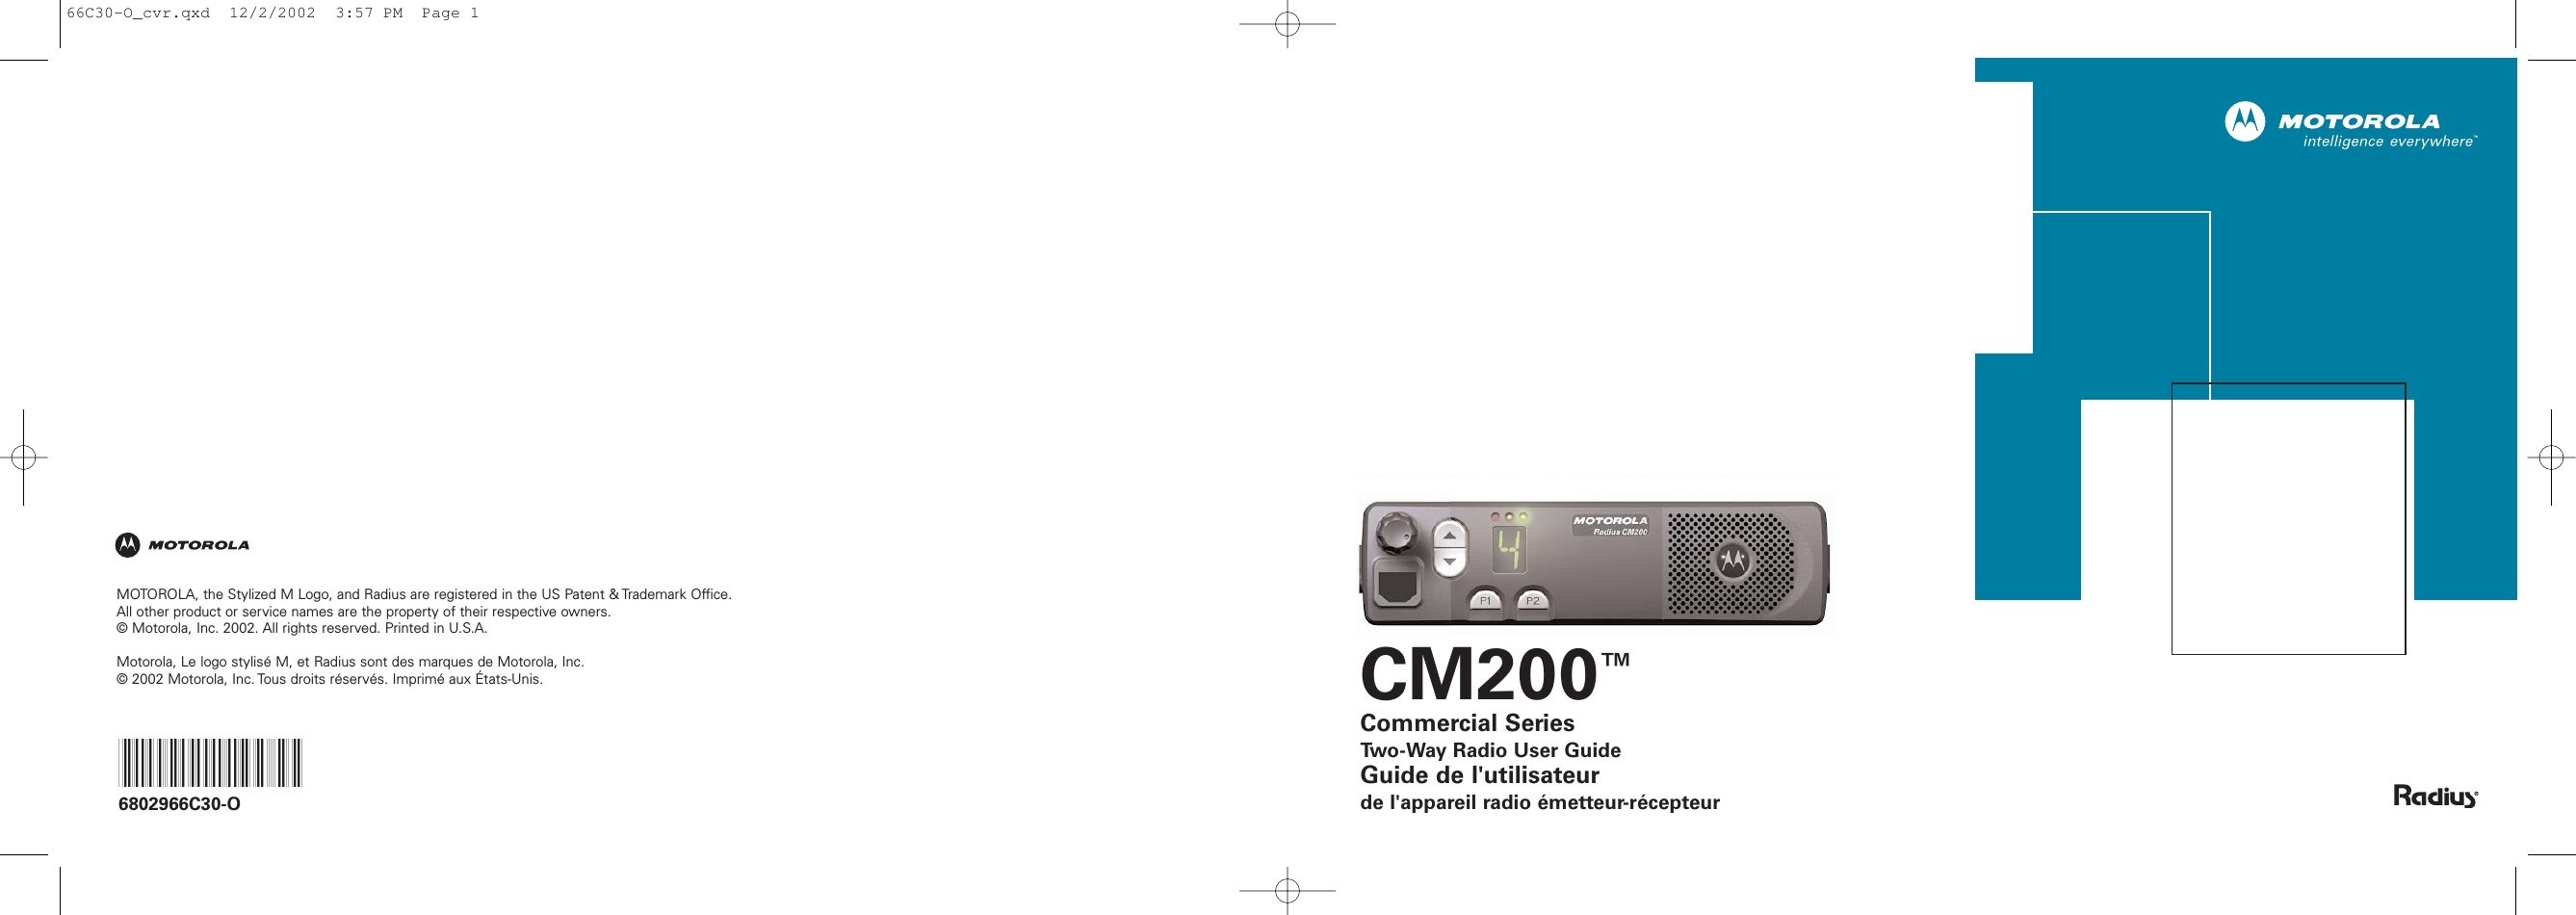 CM200™Commercial SeriesTwo-Way Radio User GuideGuide de l&apos;utilisateurde l&apos;appareil radio émetteur-récepteurMOTOROLA, the Stylized M Logo, and Radius are registered in the US Patent &amp; Trademark Office.All other product or service names are the property of their respective owners. © Motorola, Inc. 2002. All rights reserved. Printed in U.S.A.Motorola, Le logo stylisé M, et Radius sont des marques de Motorola, Inc.© 2002 Motorola, Inc. Tous droits réservés. Imprimé aux États-Unis.*6802966C30*6802966C30-O66C30-O_cvr.qxd  12/2/2002  3:57 PM  Page 1